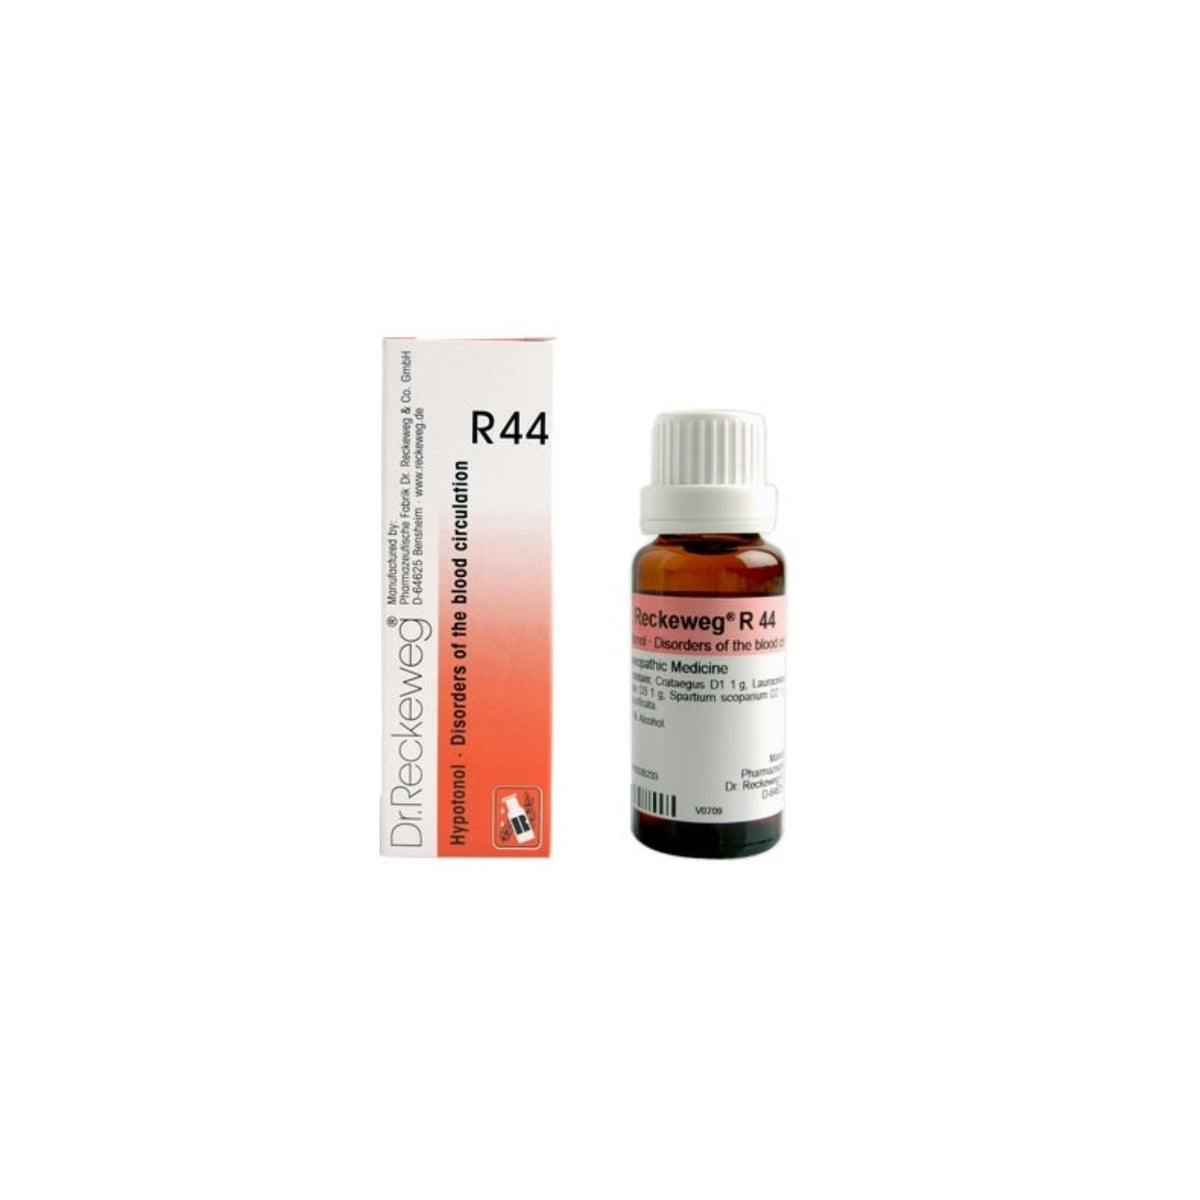 Dr Reckeweg Homoeopathy R44 Disorders Of The Blood Circulation Drops 22 ml